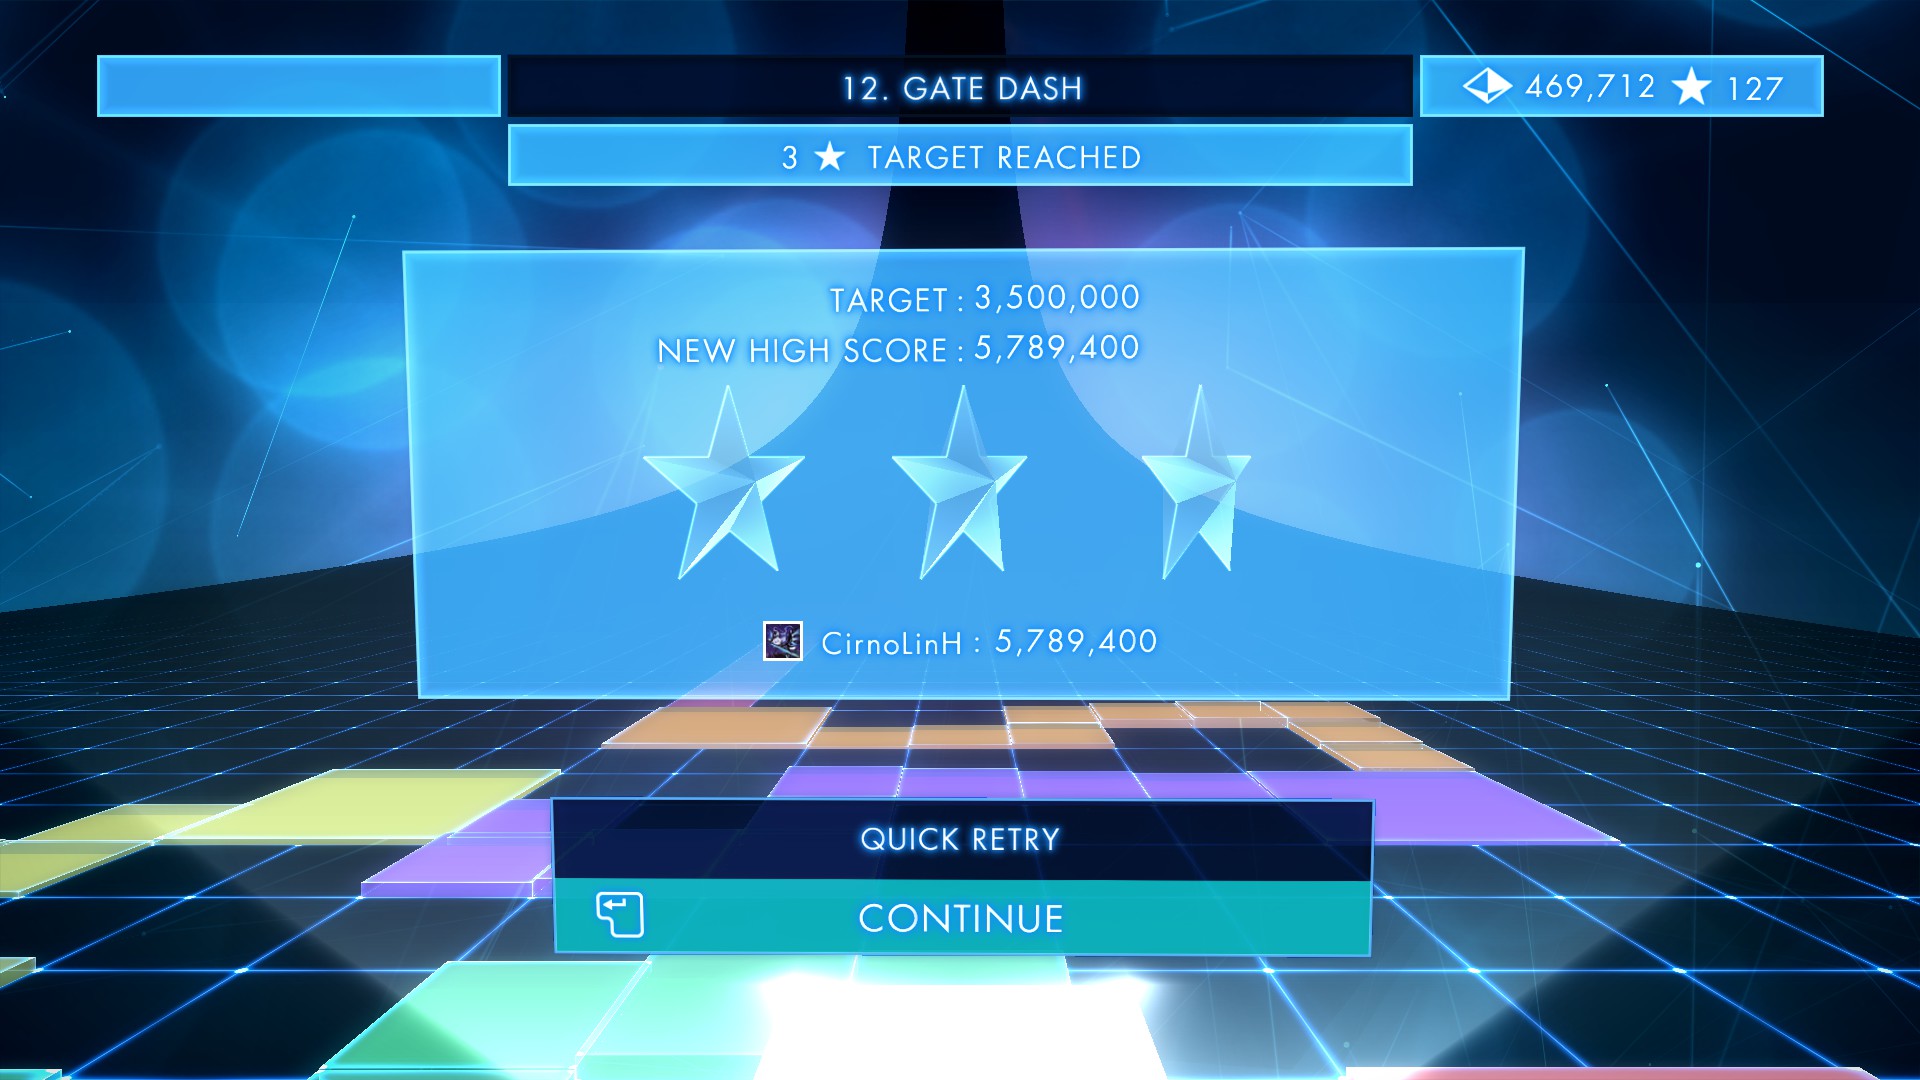 geometry wars 3 dimensions evolved cheats